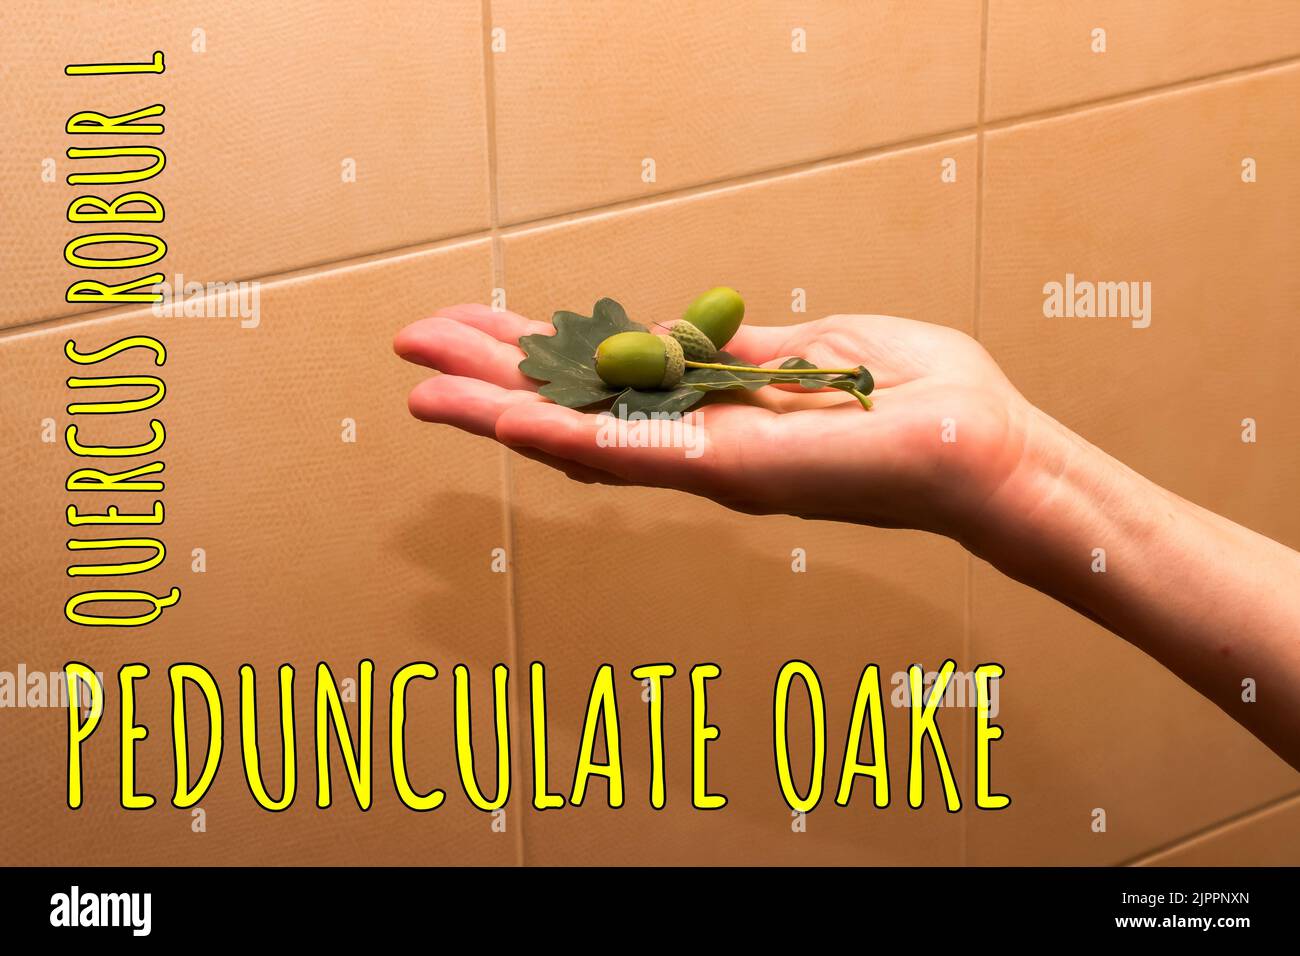 Woman's hand holds leaves and acorns PEDUNCULATE OAK. The Latin name of the plant is QUERCUS ROBUR L. Stock Photo